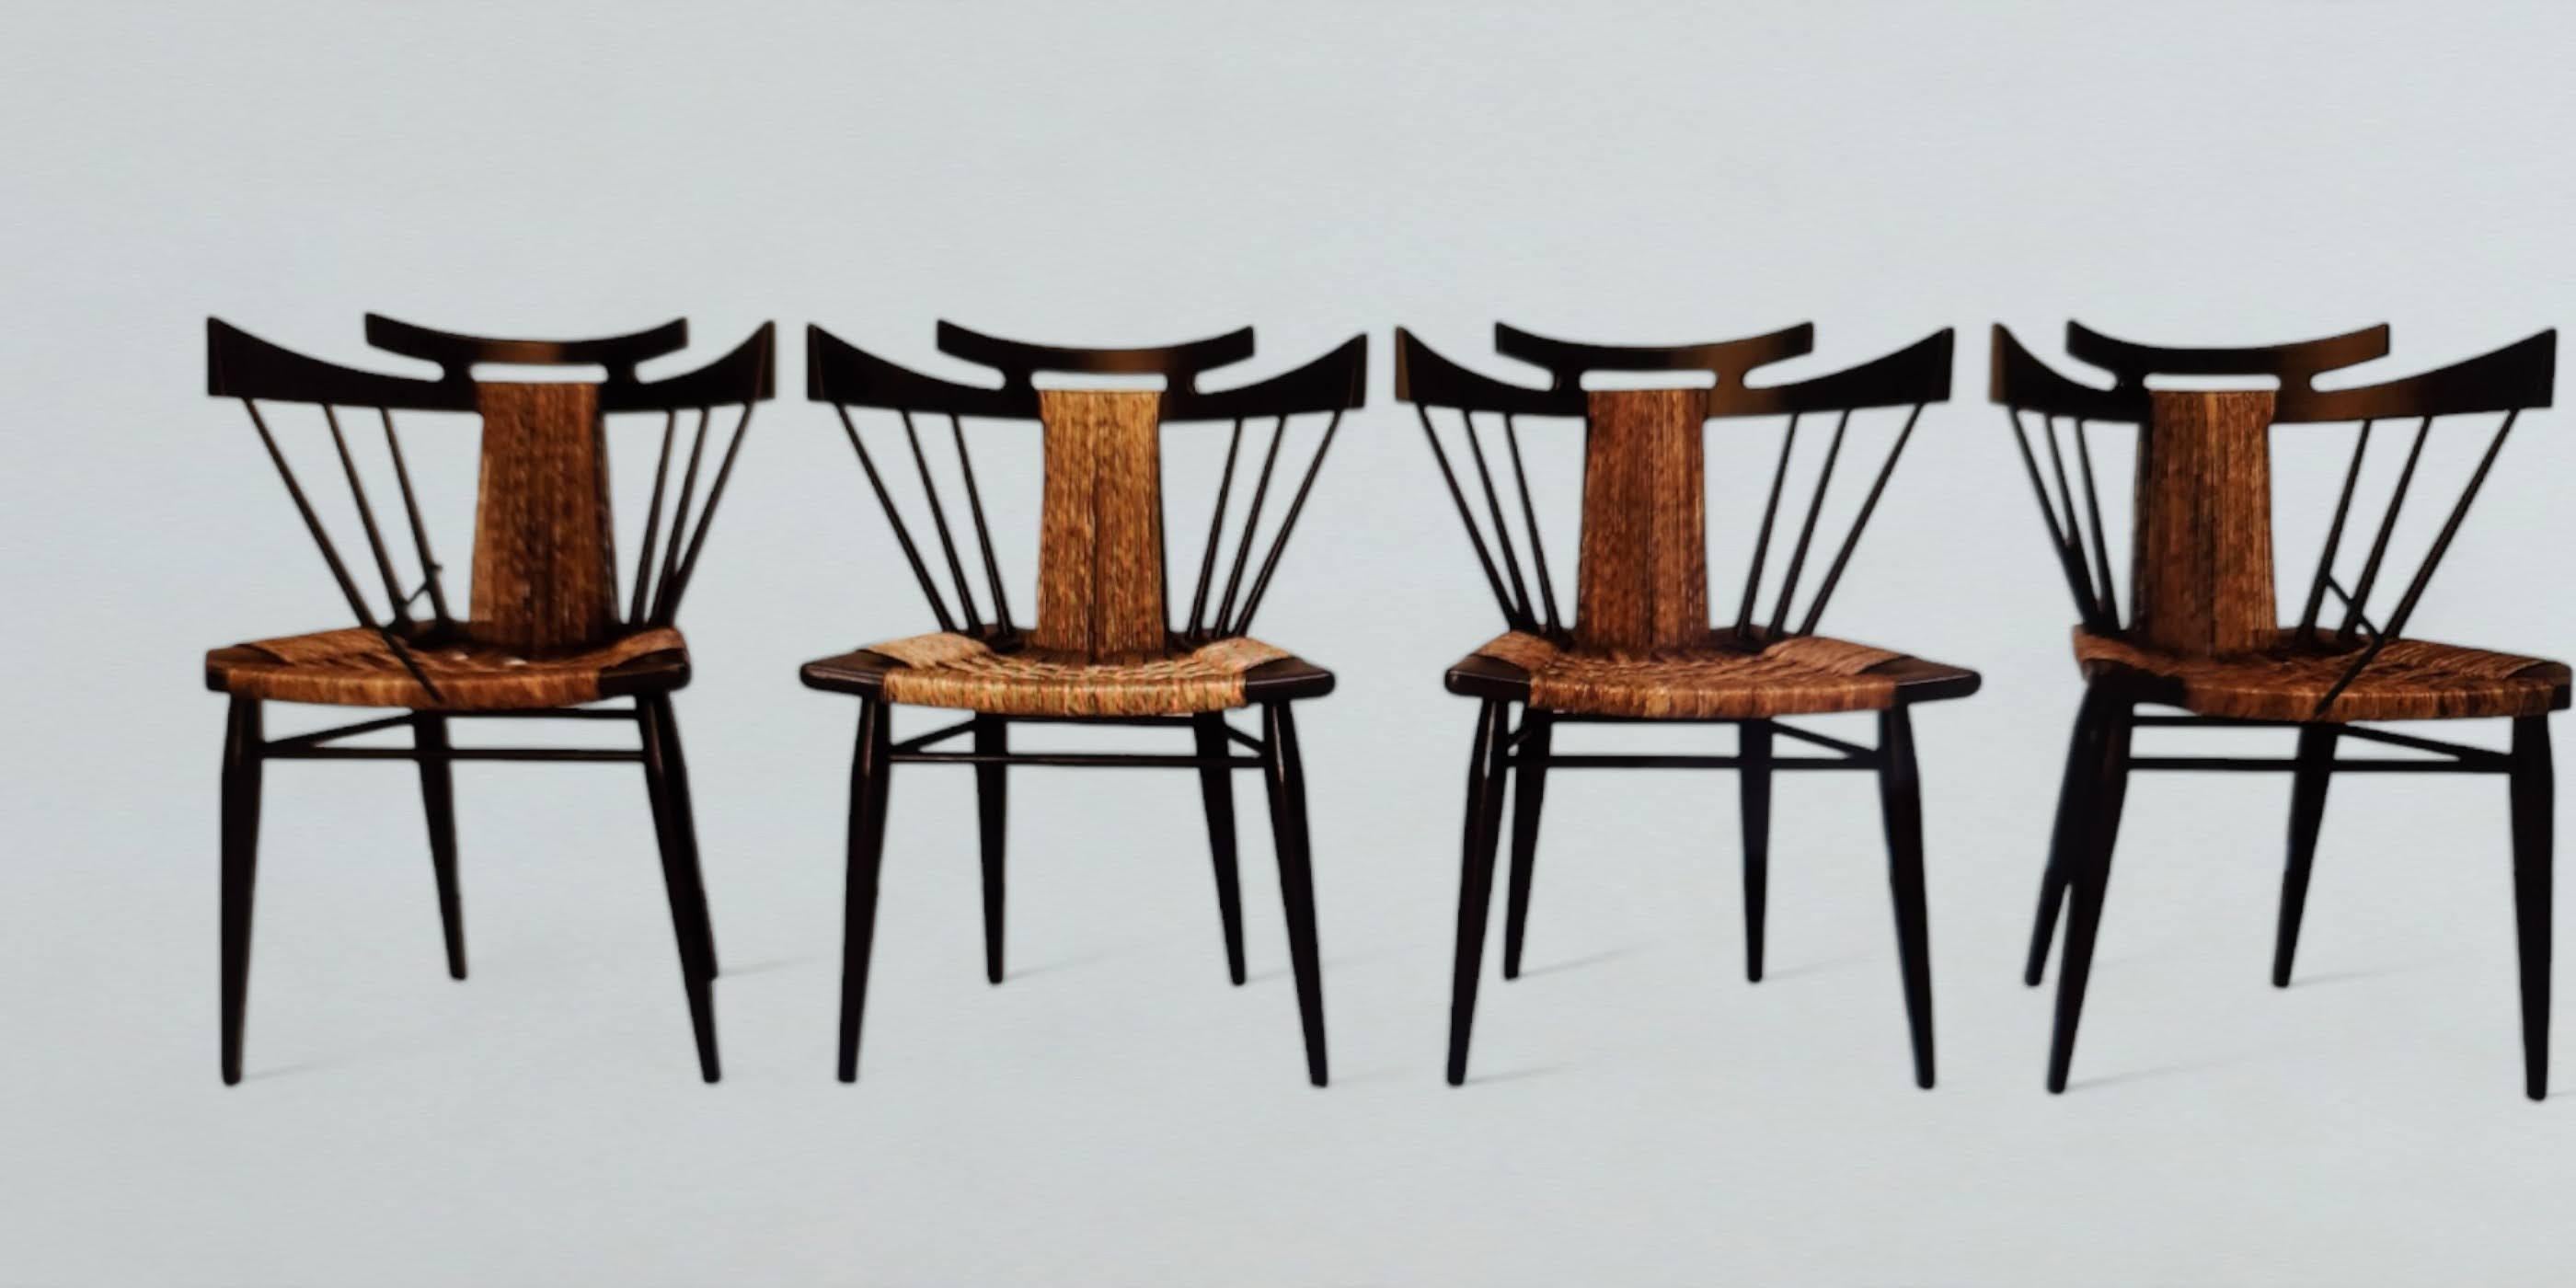 Edmond Spence Six Piece Mahogany Dinning Set for Industria Mueblera, S.A. 1950s  In Good Condition For Sale In Camden, ME